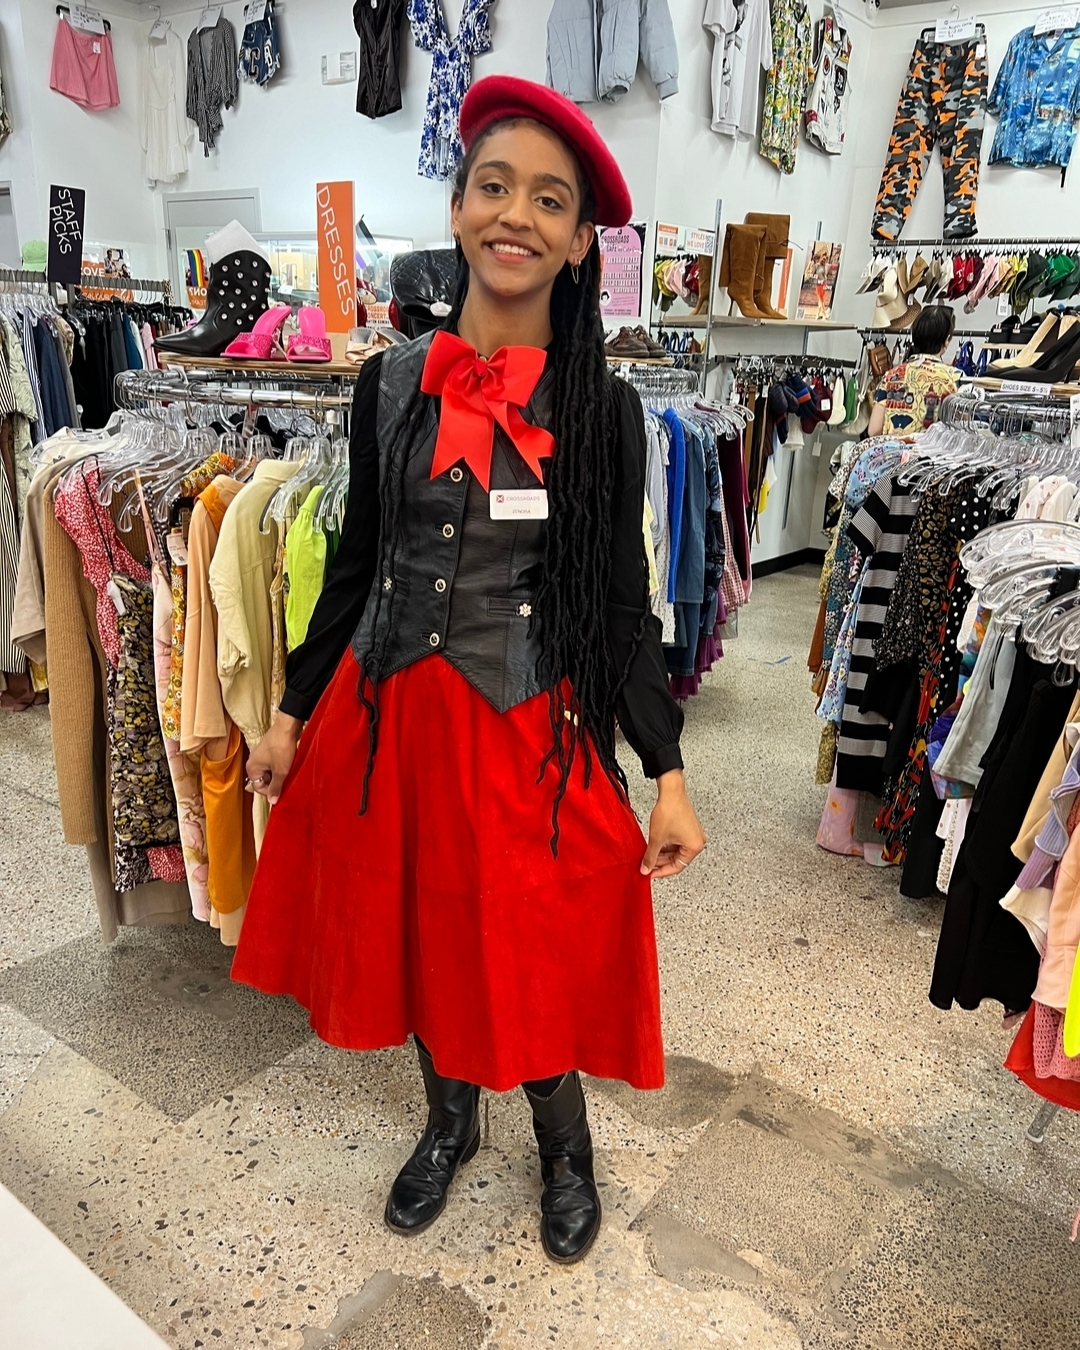 Spotlight on Staff Style. 🧡 SWIPE 👉 ⁣Crossroads has the best-dressed employees! Want to join the team? Click the Careers link in our bio!​​​​​​​​​⁣⁣⁣⁣⁣⁣

#crossroadstrading #crossroadsfinds #crossroadsstore #fashionfinds #buyselltrade #style #thriftfinds #consignment #shopping #womensfashion #mensfashion #fashionblogger #ootd #fashion